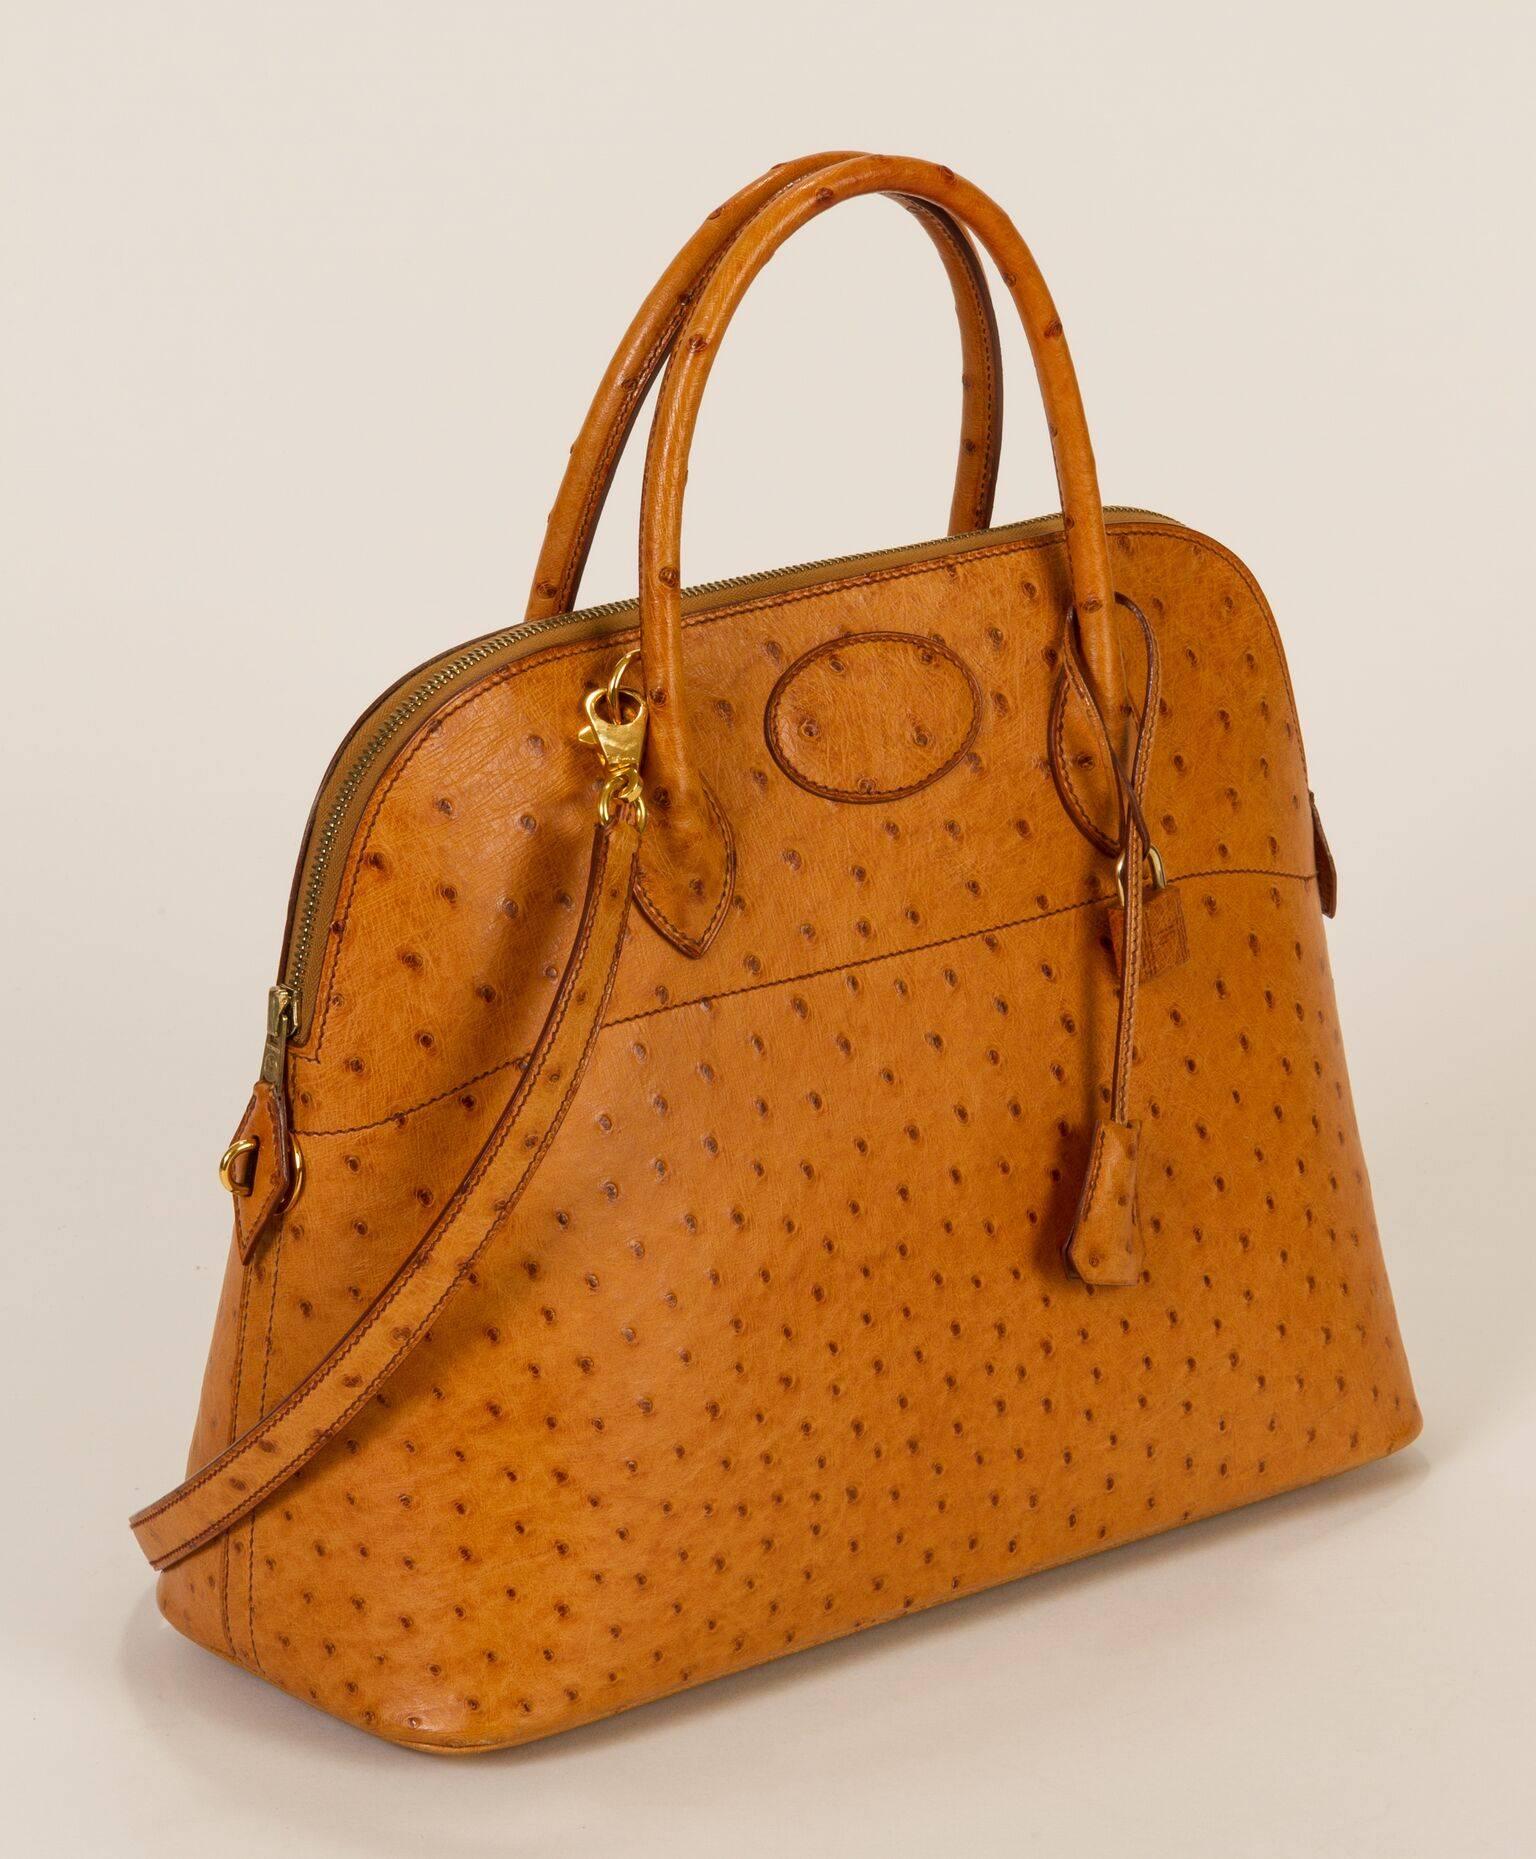 Hermès chestnut 35cm ostrich Bolide bag. Gold hardware. Comes in duster, with lock, key and optional chain strap. Leather interior with pocket. Comes with box. Date stamped circled Z for 1996. Handle drop, 4